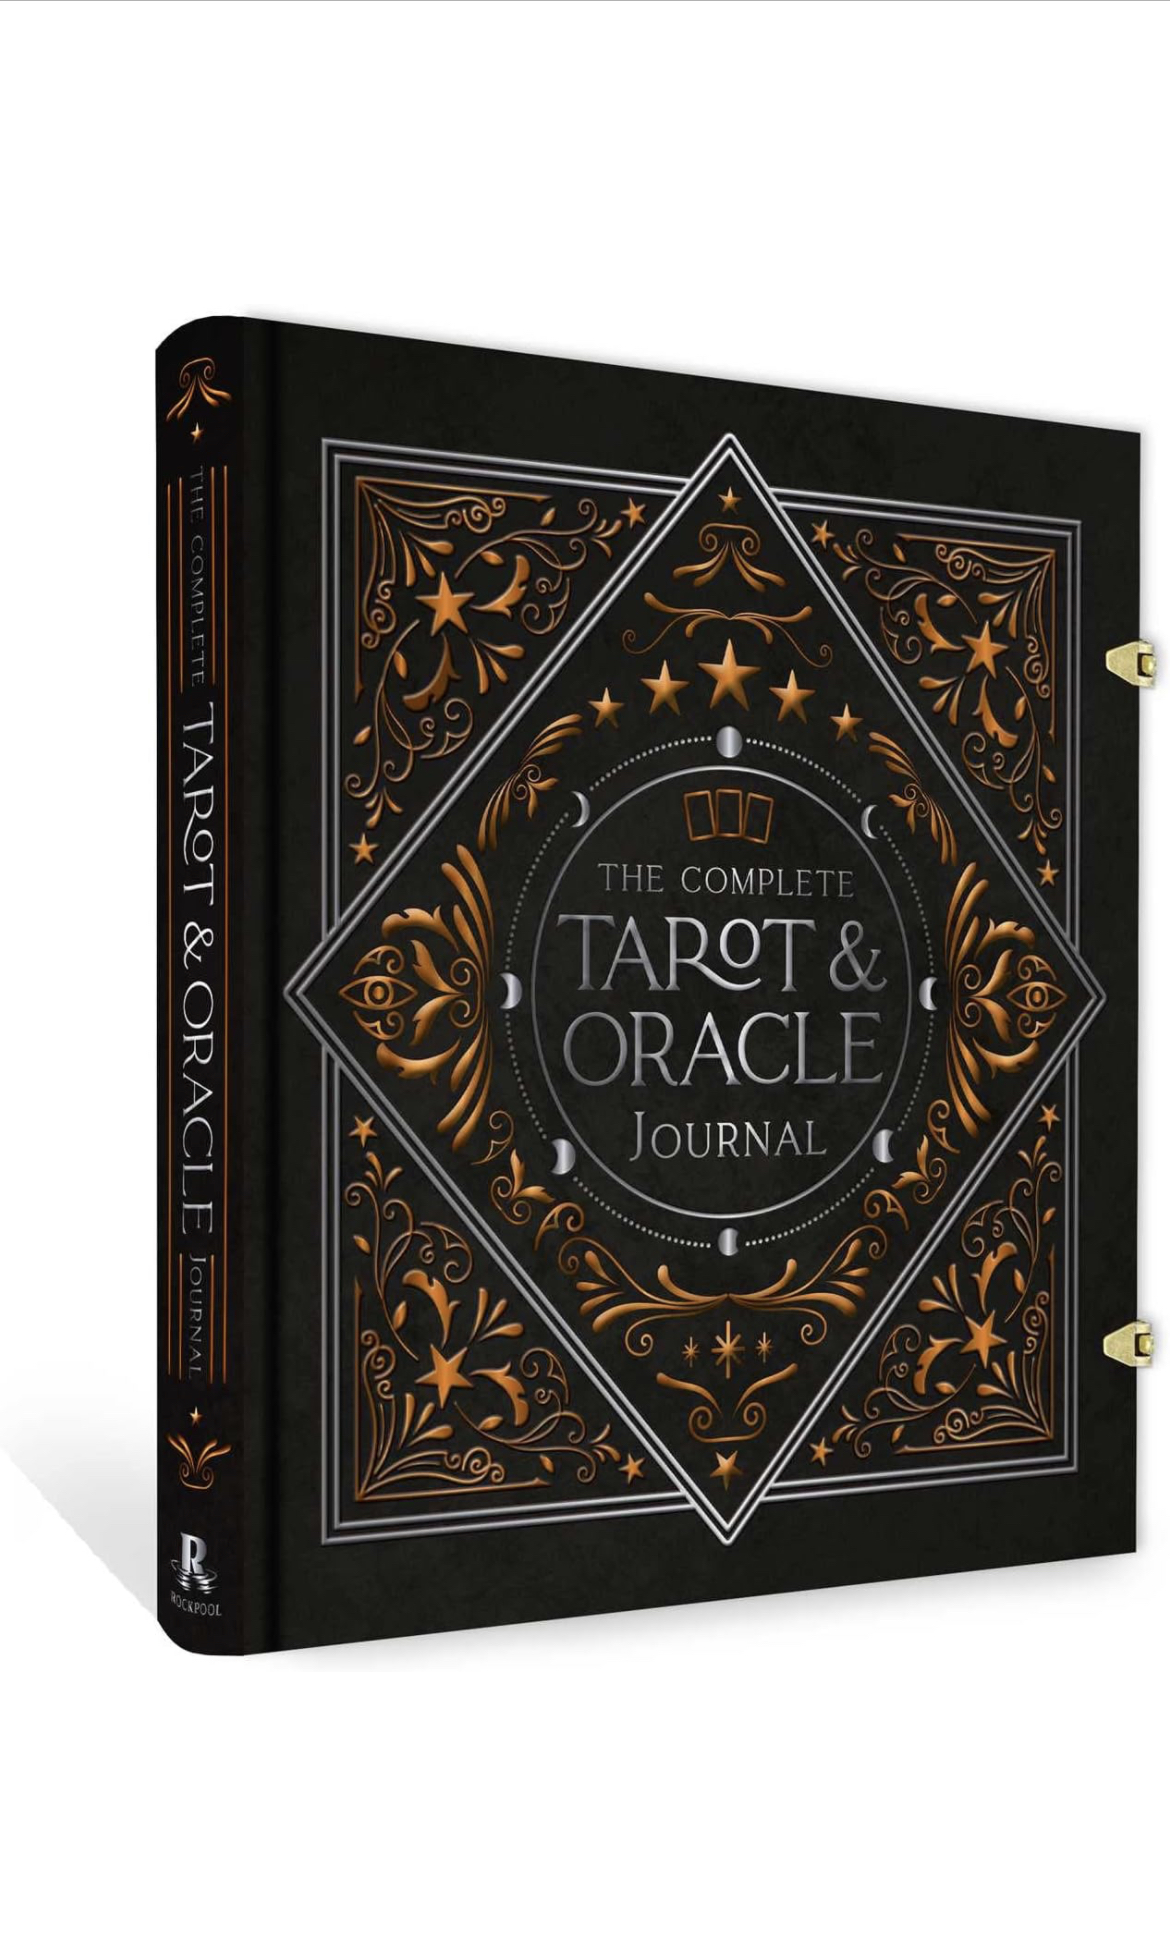 The complete tarot and oracle journal